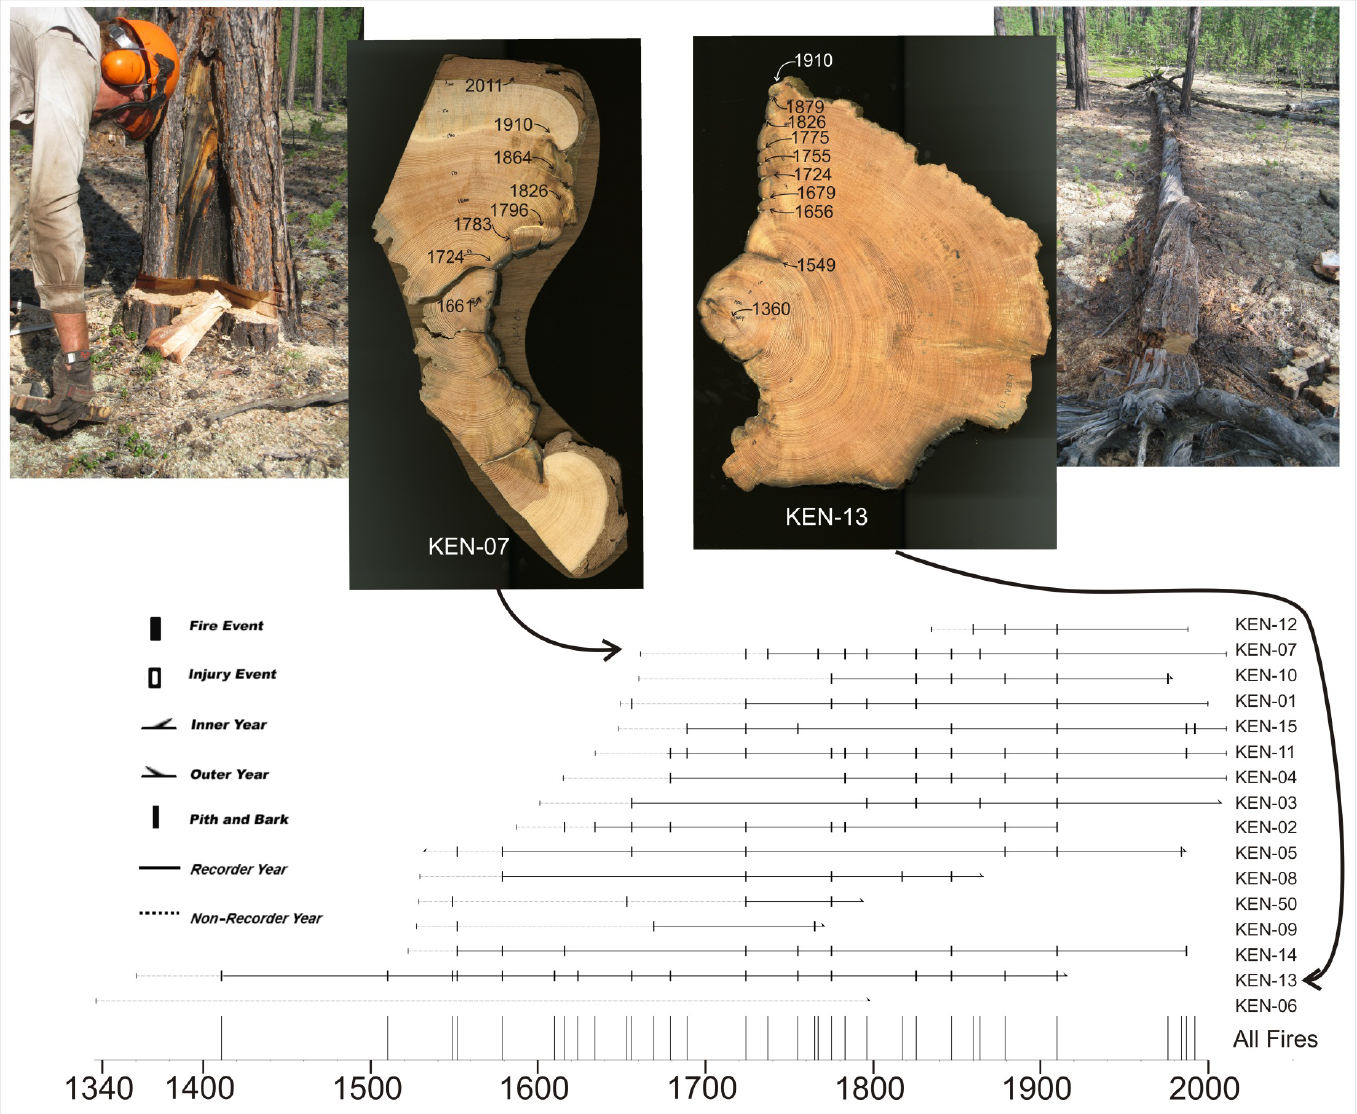 Reconstruction of historical fires from tree rings in Siberia. Partial cross-sections of trees, stumps, and logs contain preserved fire scars that can be precisely dated (top). The fire-scar dates are combined by tree (horizontal lines at bottom) for each site to generate a master chronology of fire activity (tick marks at bottom), providing long-term records of fire regimes. (Credit: Chris Guiterman, unpublished).